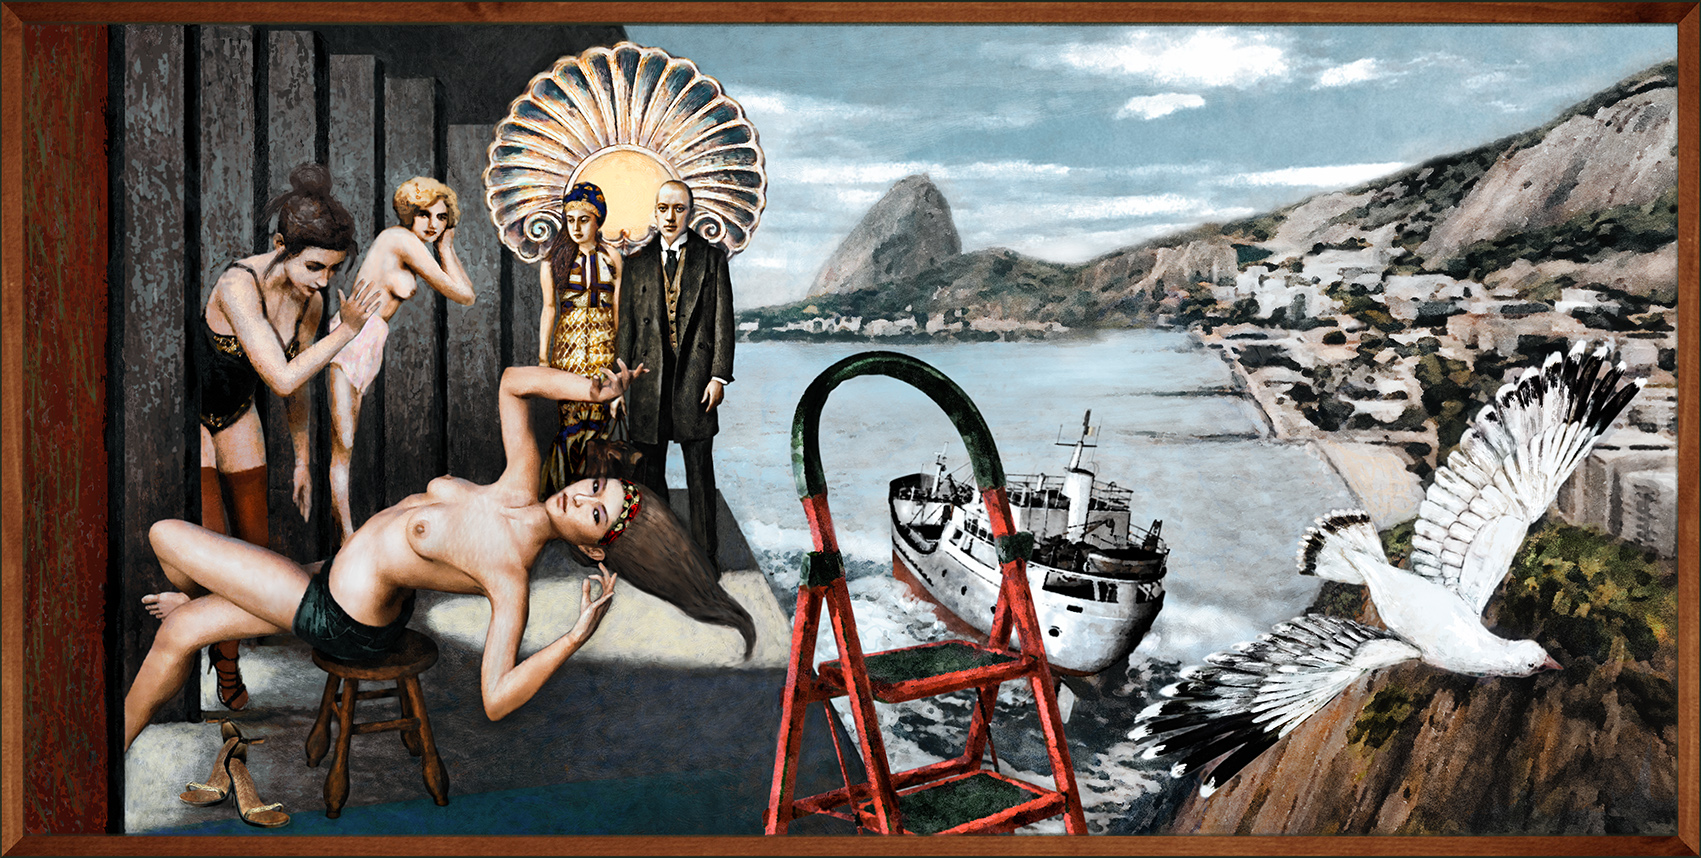 Delvaux arrives in Rio